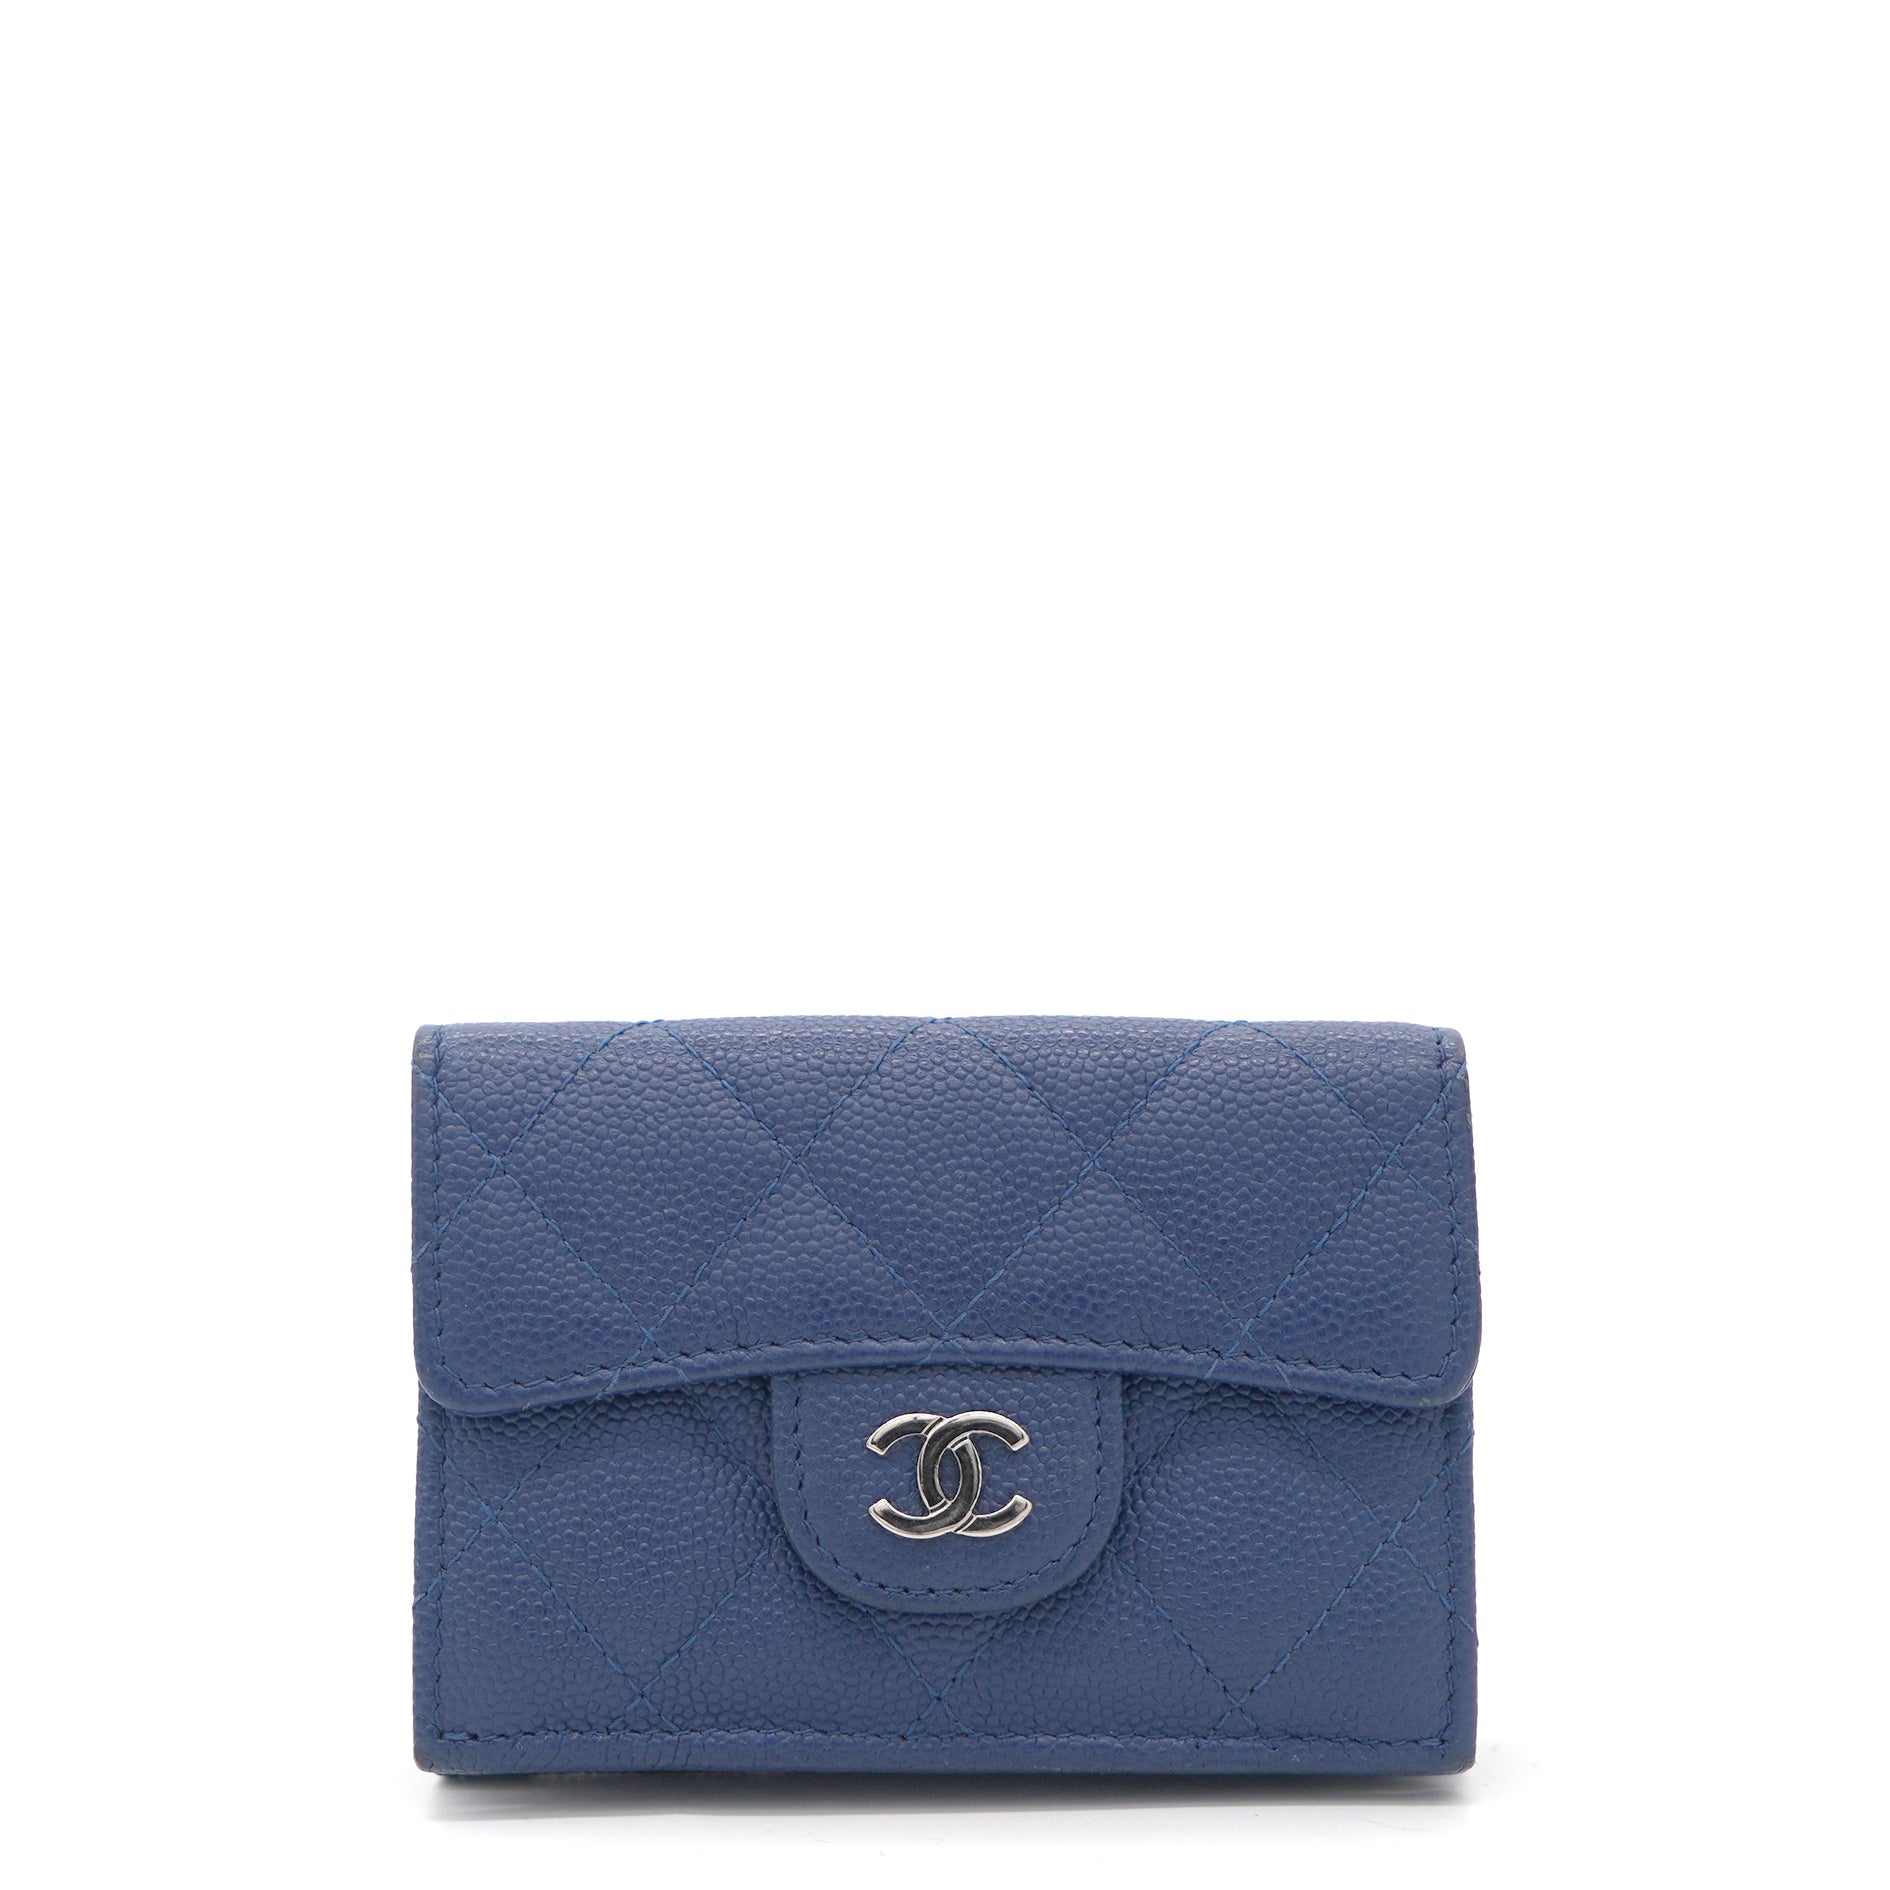 Classic Caviar Quilted Tri-Fold Wallet Navy